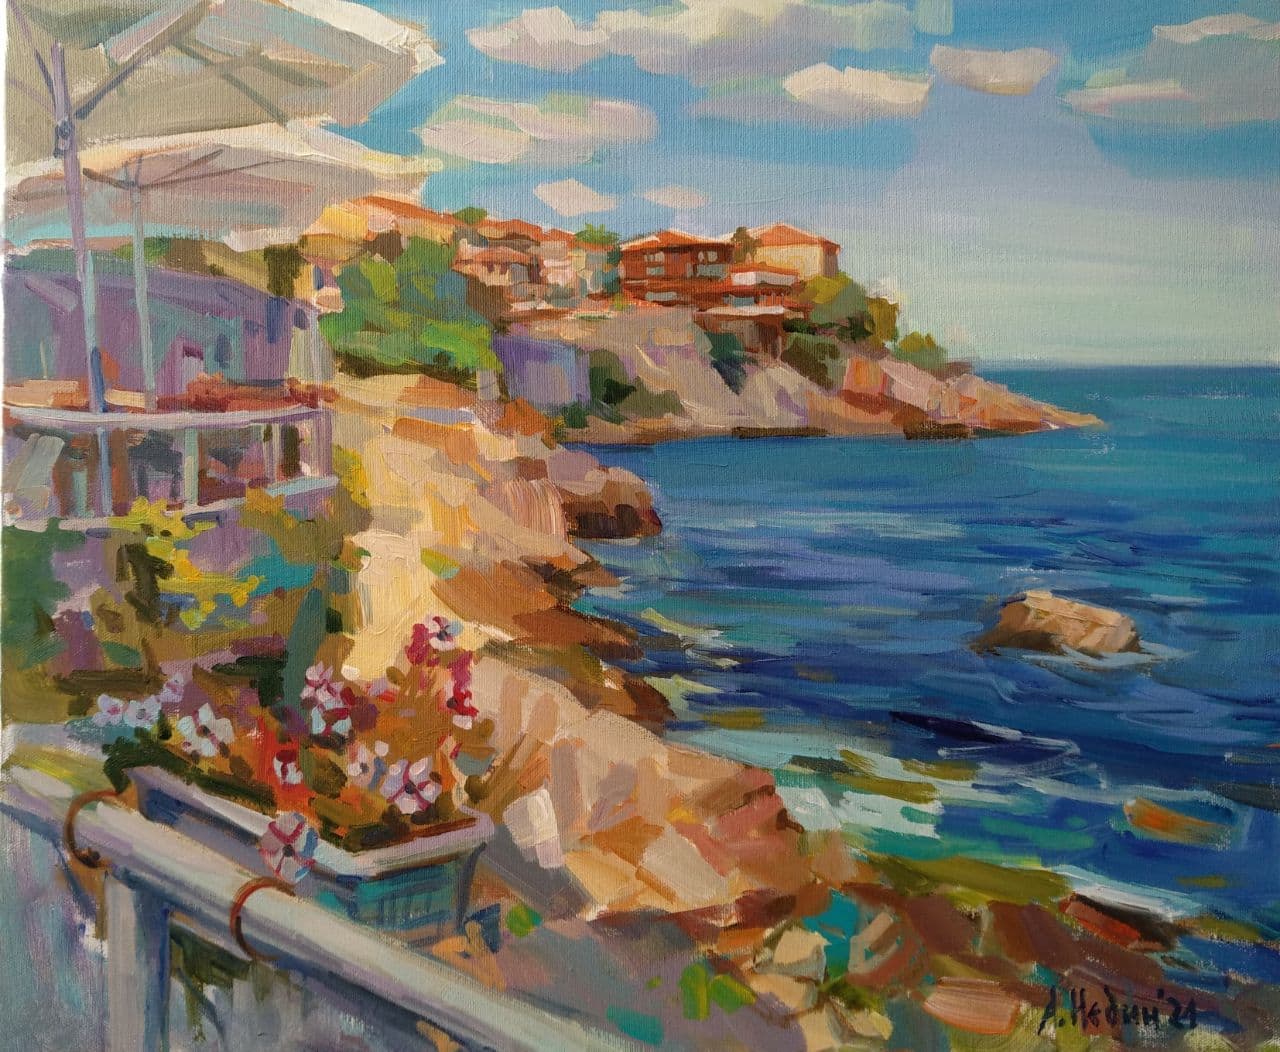 "Southern Alley of Sozopol" Landscape painting by Angelina Nedin 2021